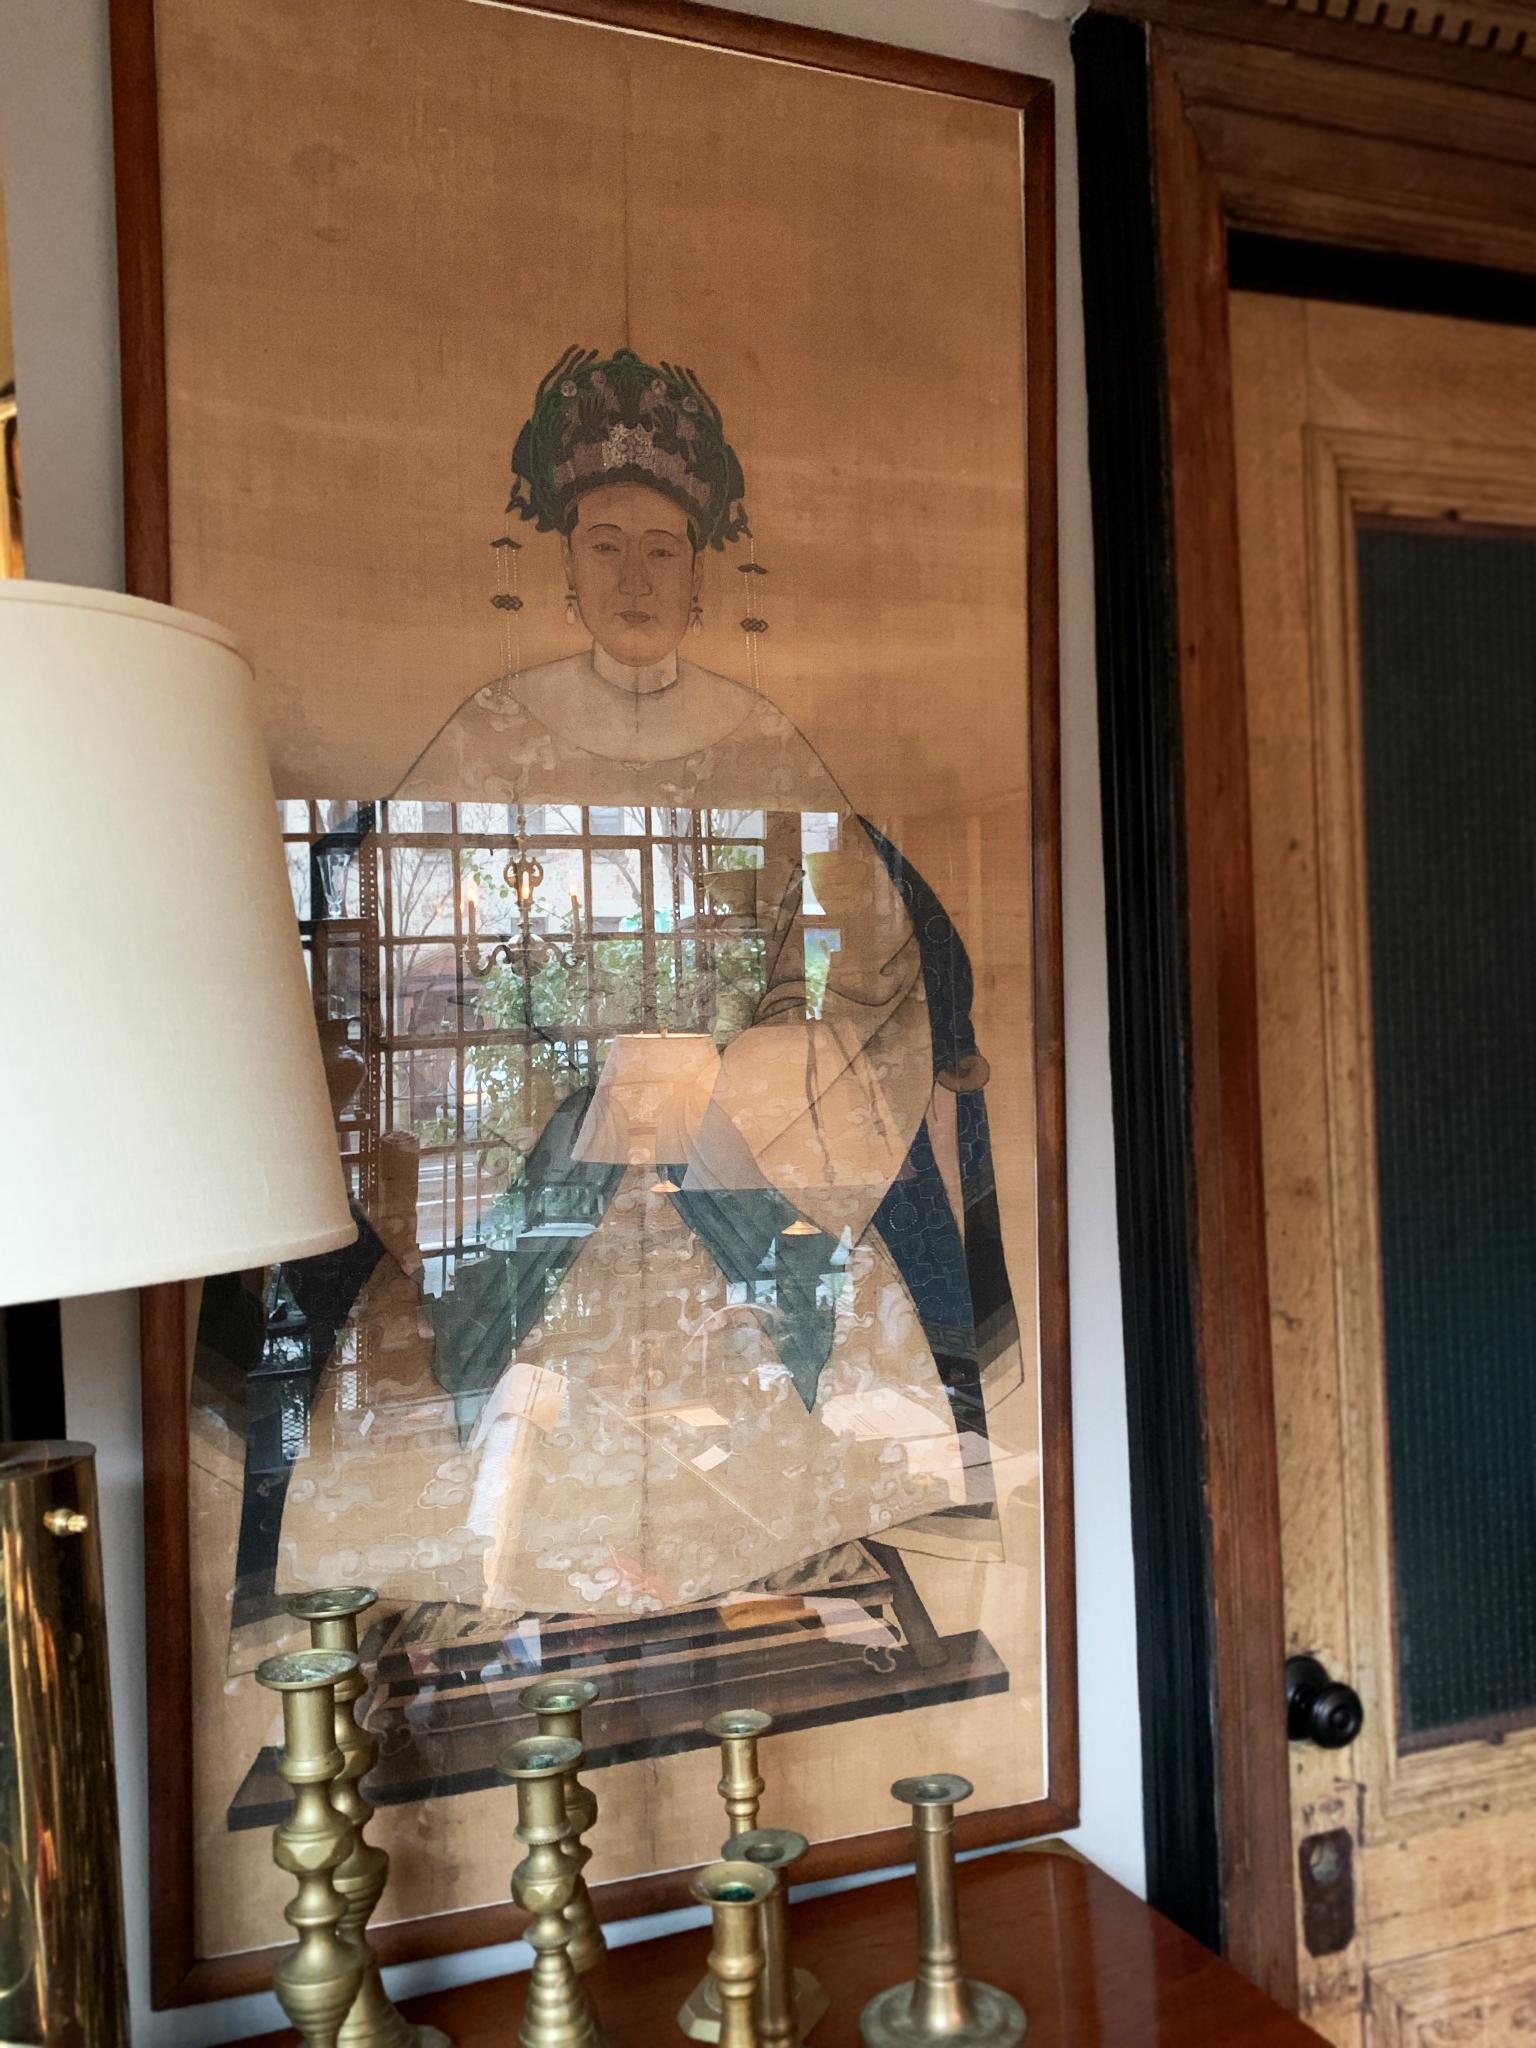 This diptych comprises of a pair of paintings on silk, with glass and wood frames, made 1900-1925. The paintings depict two Chinese dignitaries, poised and facing the viewer in stately attire. Their faces are beautifully rendered with subtle shading